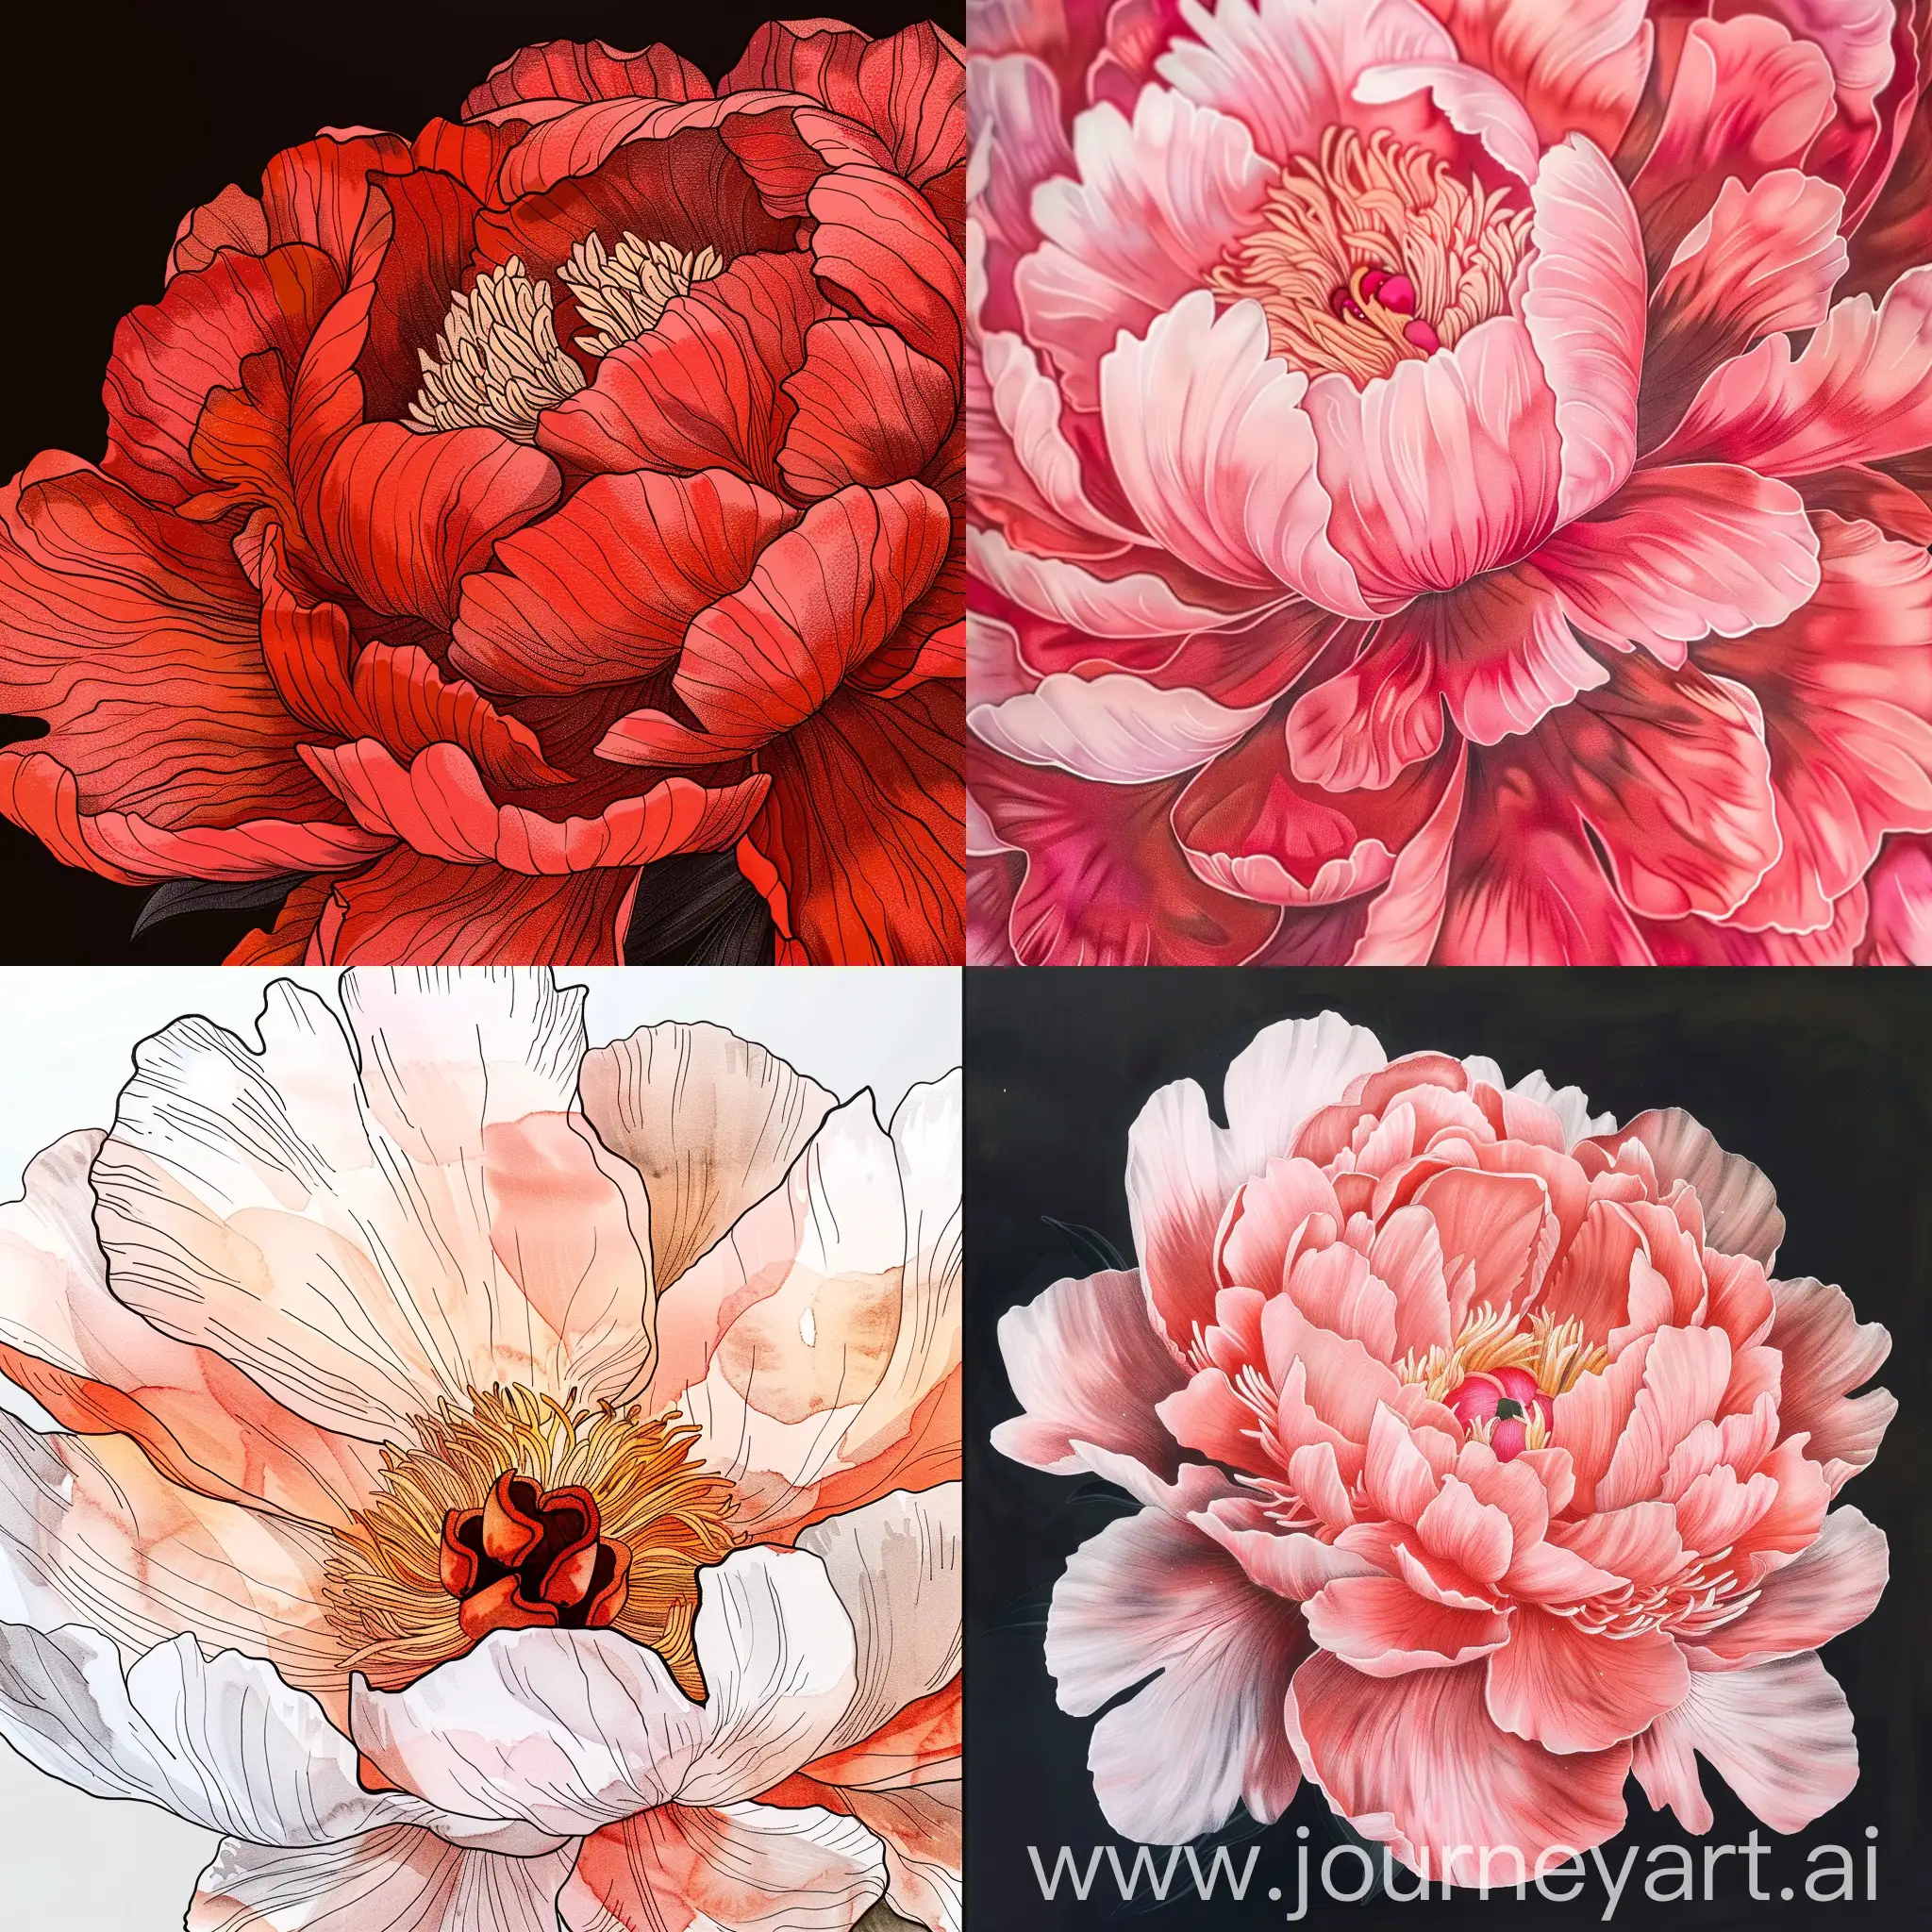 Vibrant-Marker-Illustration-of-CloseUp-Peony-in-High-Definition-HD-8K-Resolution